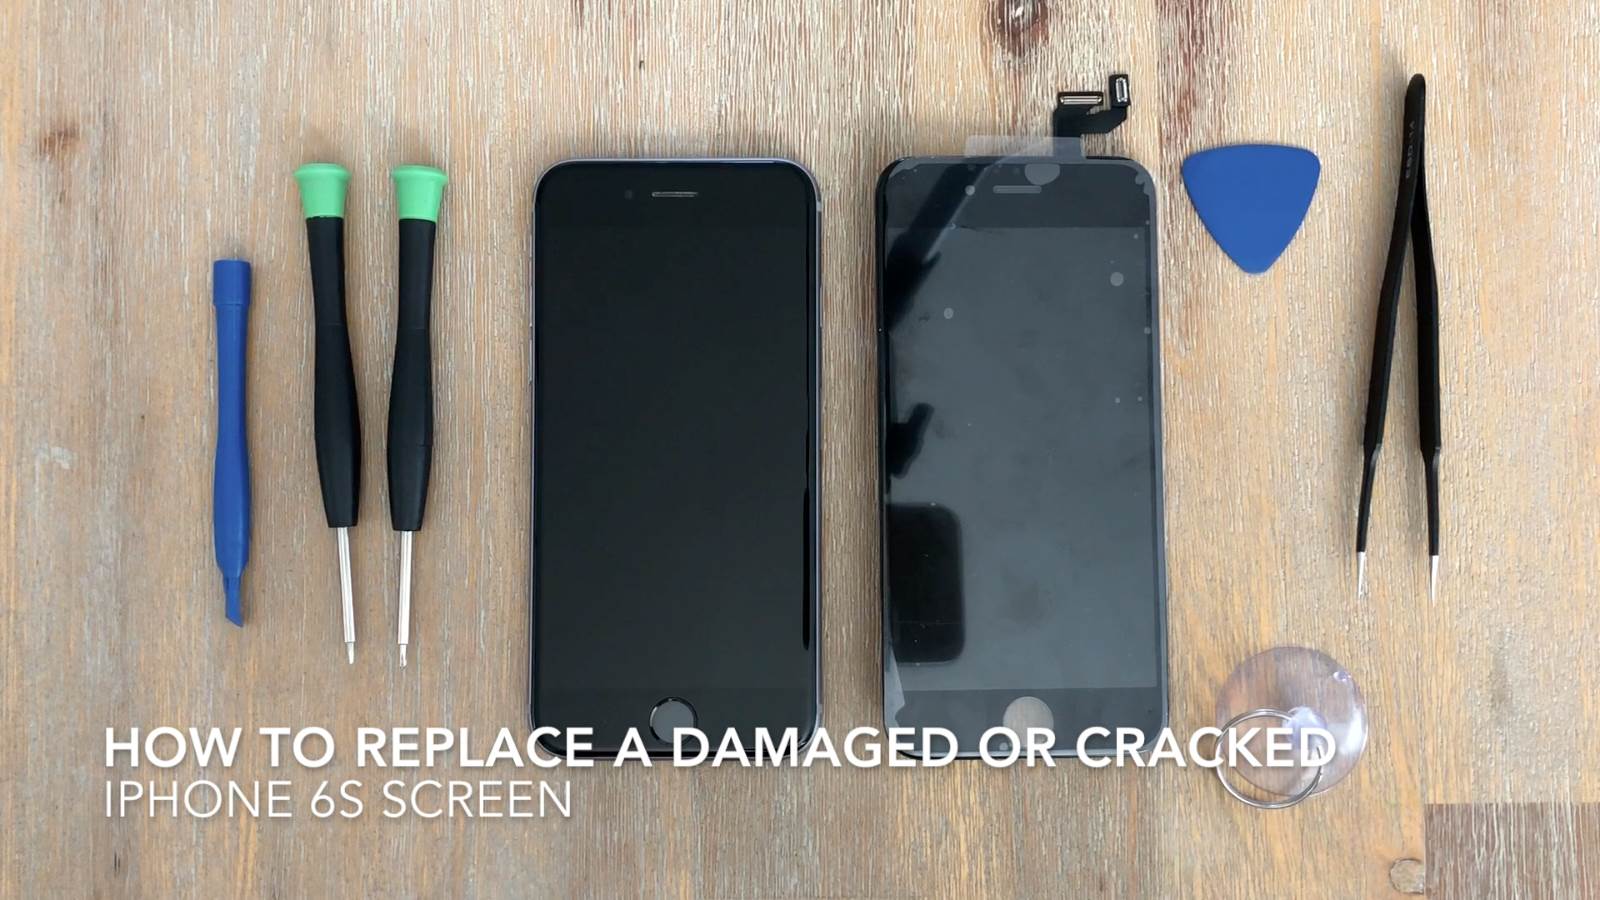 How To Replace A Shattered Or Damaged iPhone 6s Screen